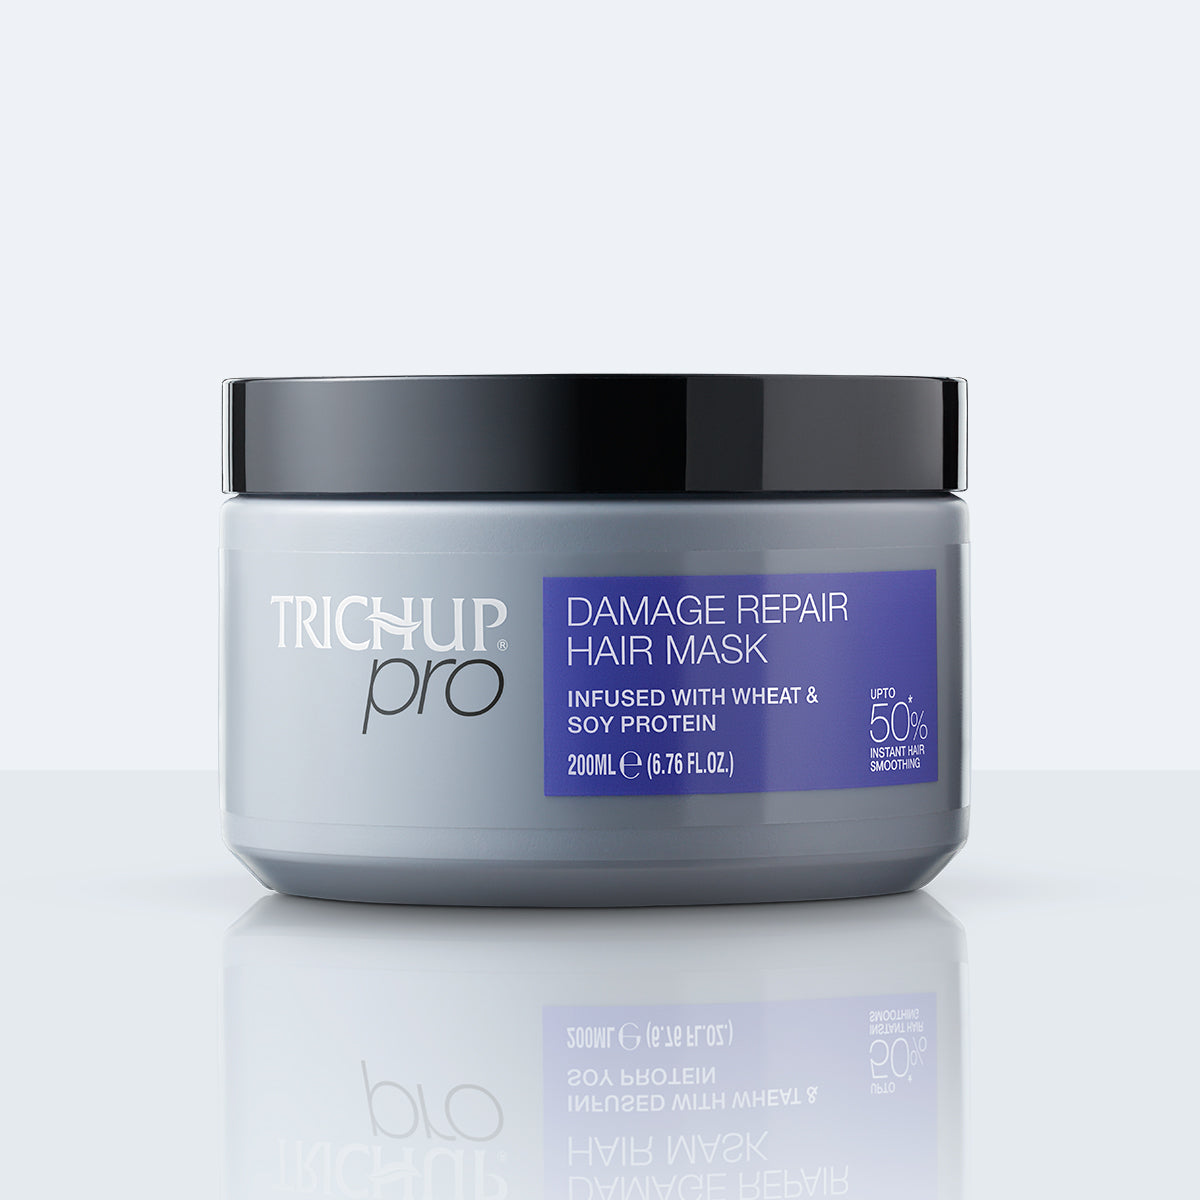 Trichup Pro Damage Repair Hair Mask for Dry Frizzy Hair | Intensely Binds & Retains Moisture | Improves Strength & Manageability | Prevents Hair Thinning, Breakage & Split Ends | Nourishment - 200 ml